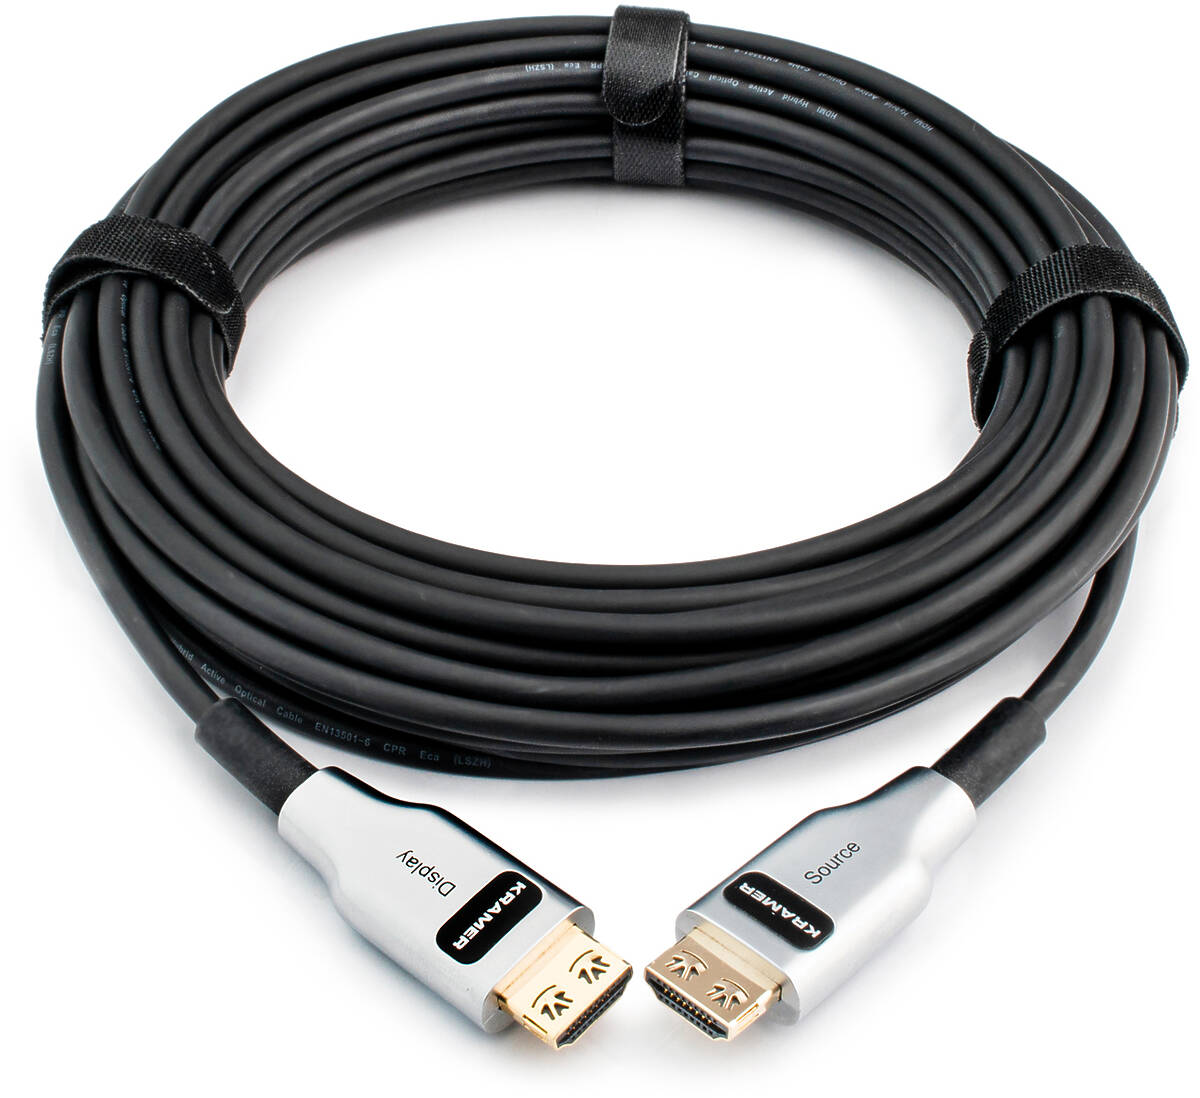 CLS-AOCH/60F-262 80.00m Kramer CLS-AOCH/60F cable product image. Click to enlarge.